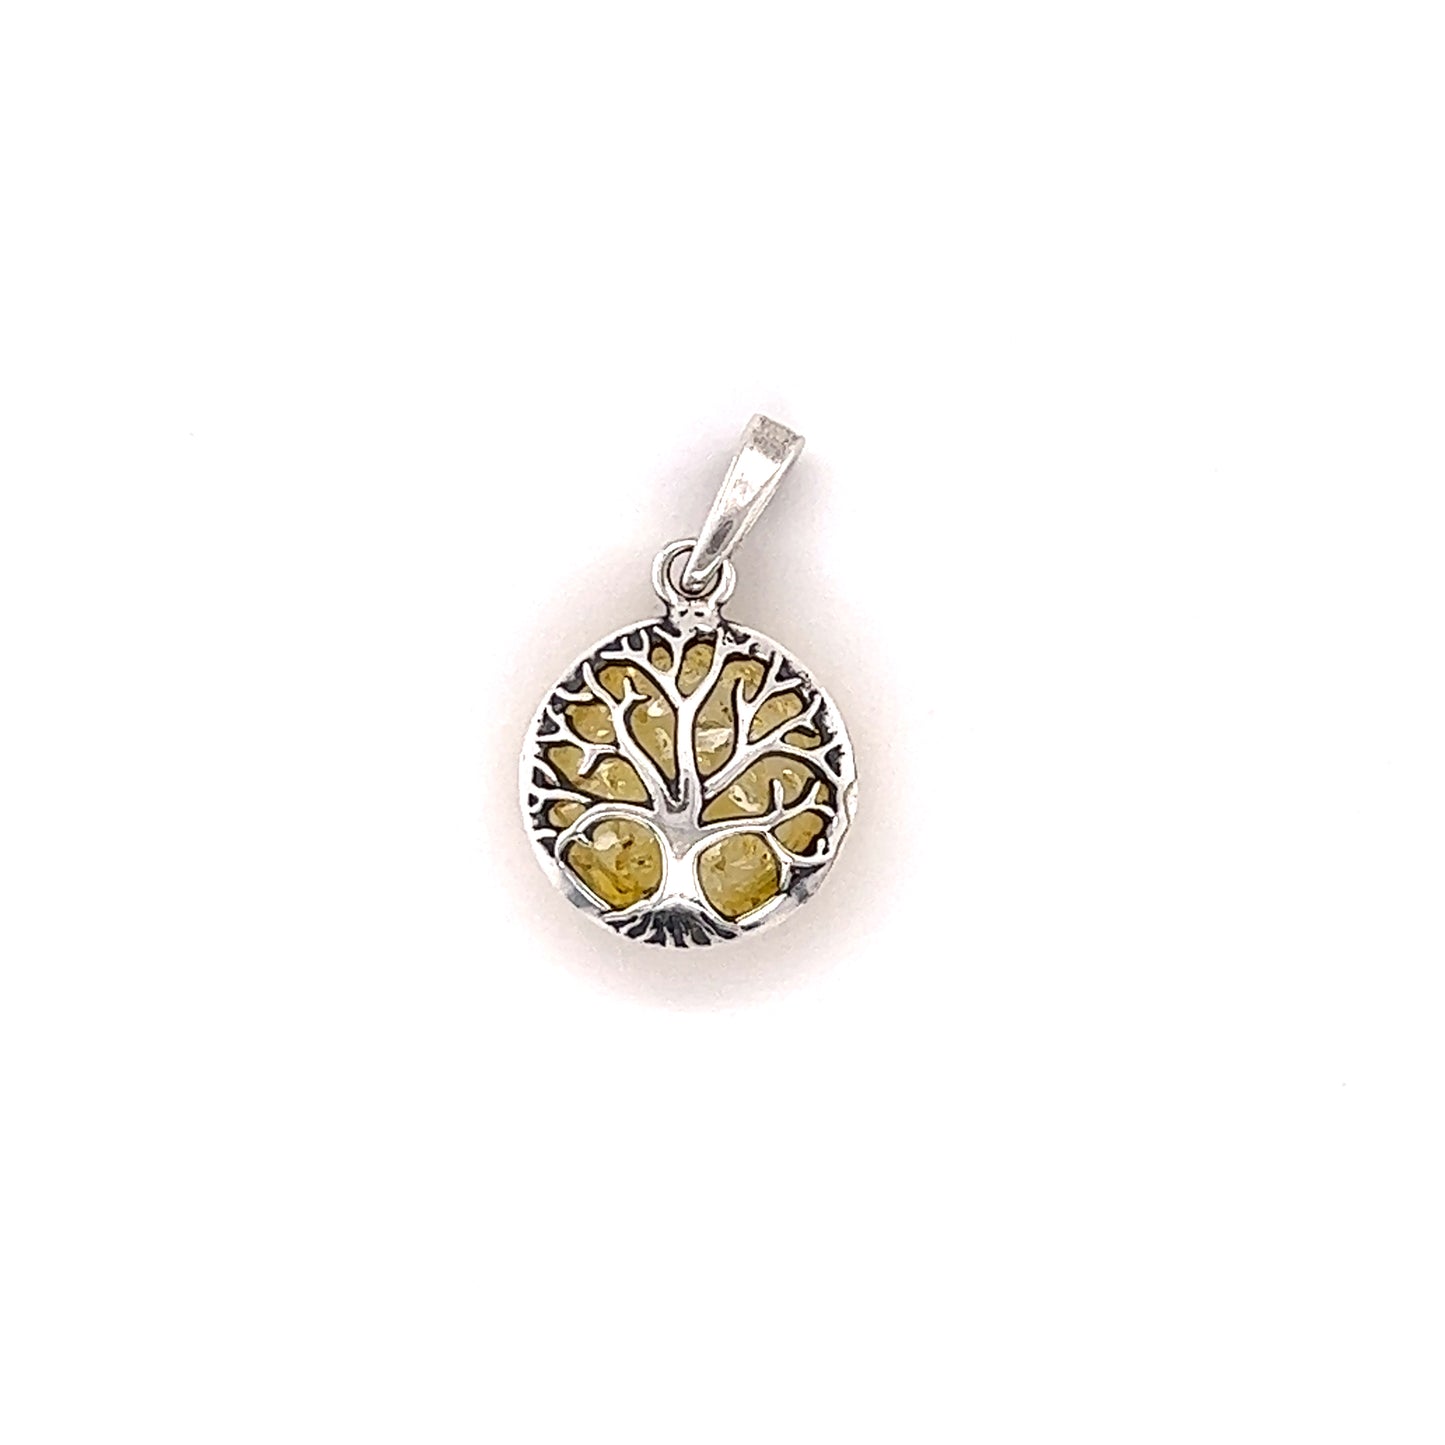 A Super Silver Charming Tree Of Life Lemon Amber Pendant with yellow stones.